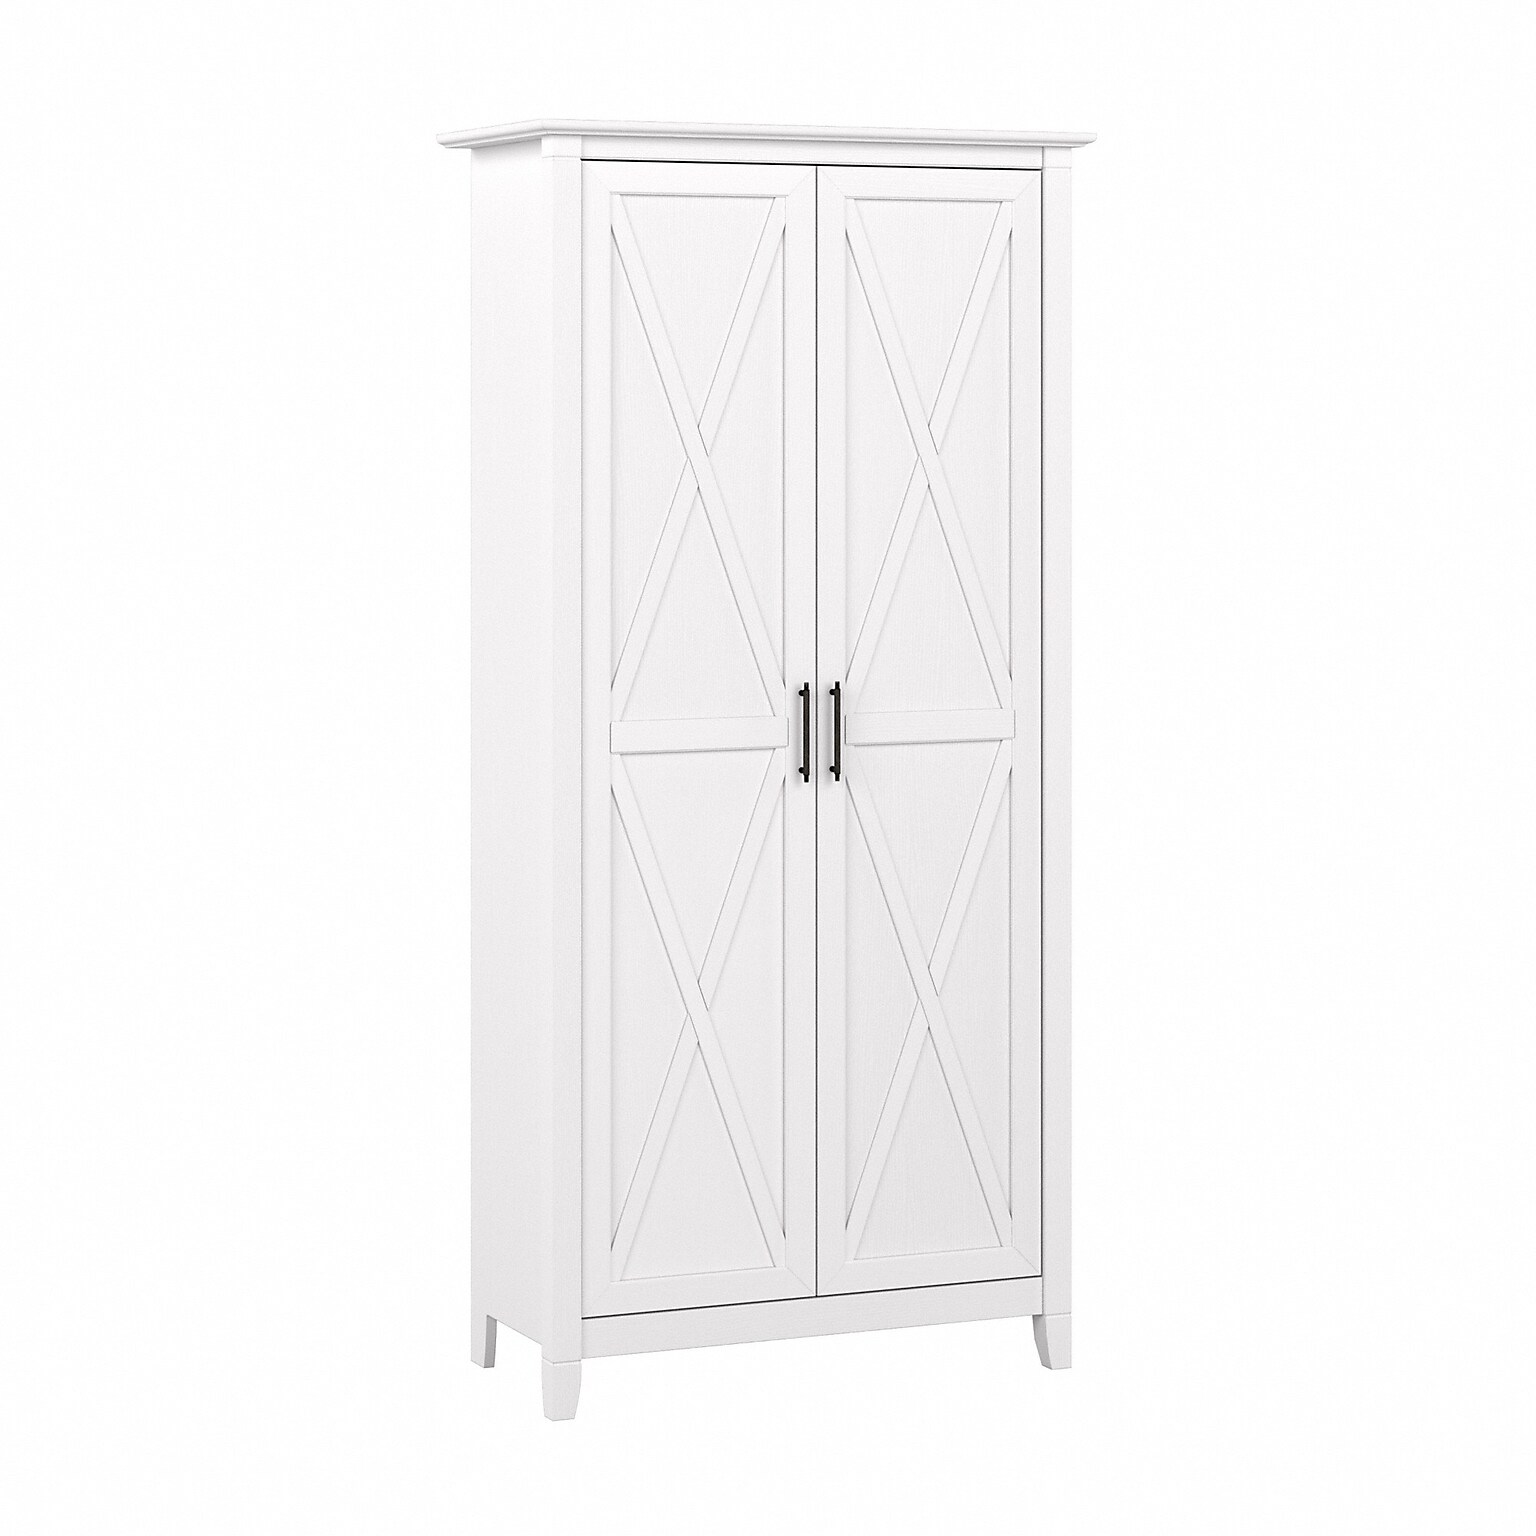 Bush Furniture Key West 66 Tall Storage Cabinet with Doors and 5 Shelves, Pure White Oak (KWS266WT-03)